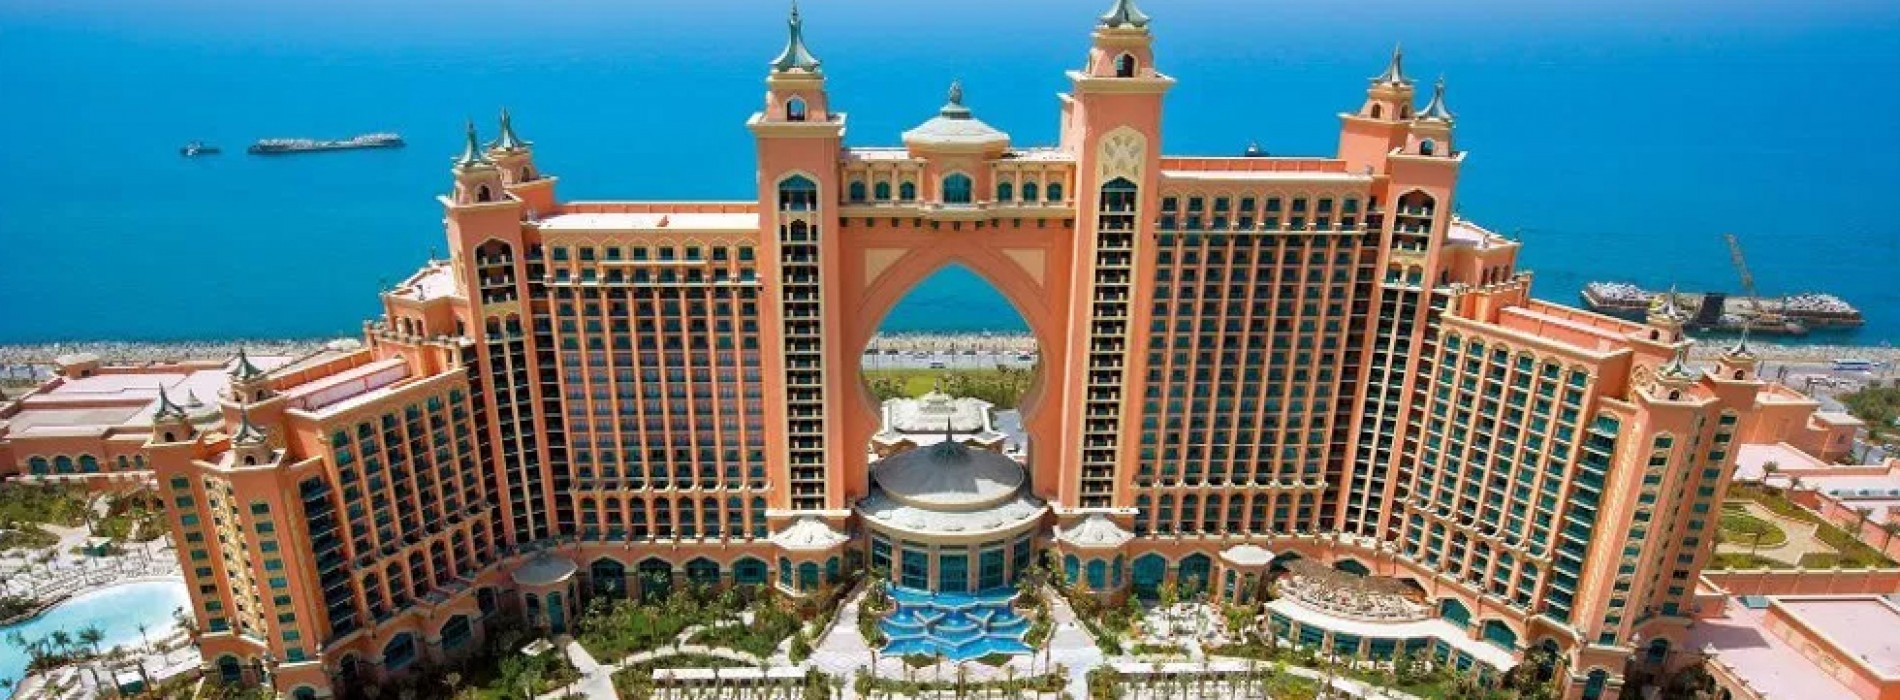 Atlantis, The Palm introduces Member’s programme for guests